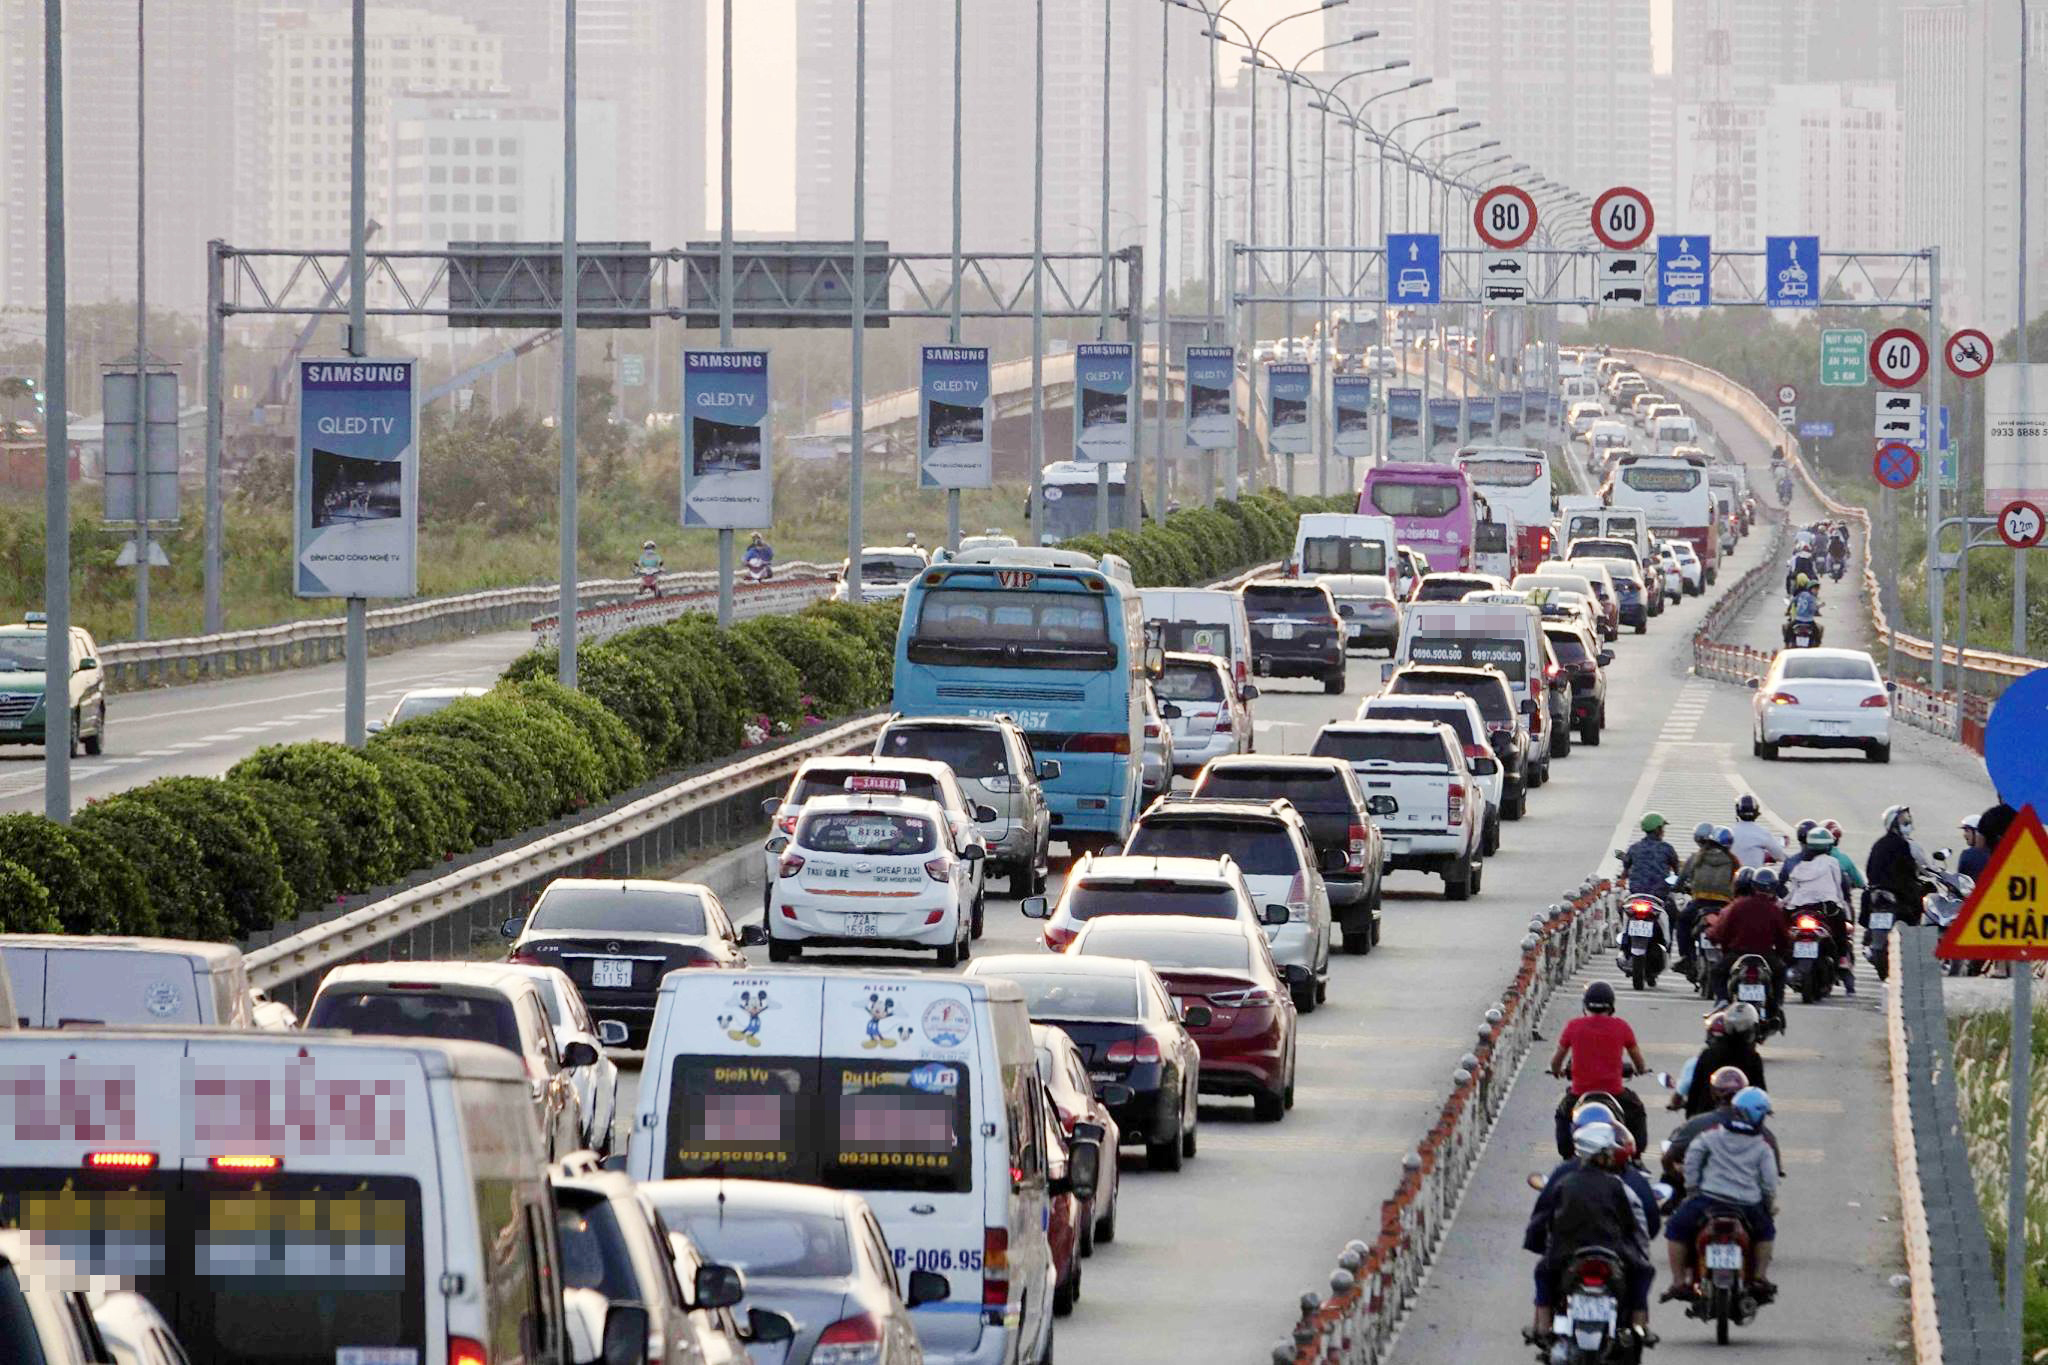 Regulations on handling traffic accidents, traffic jams, and road incidents in Vietnam